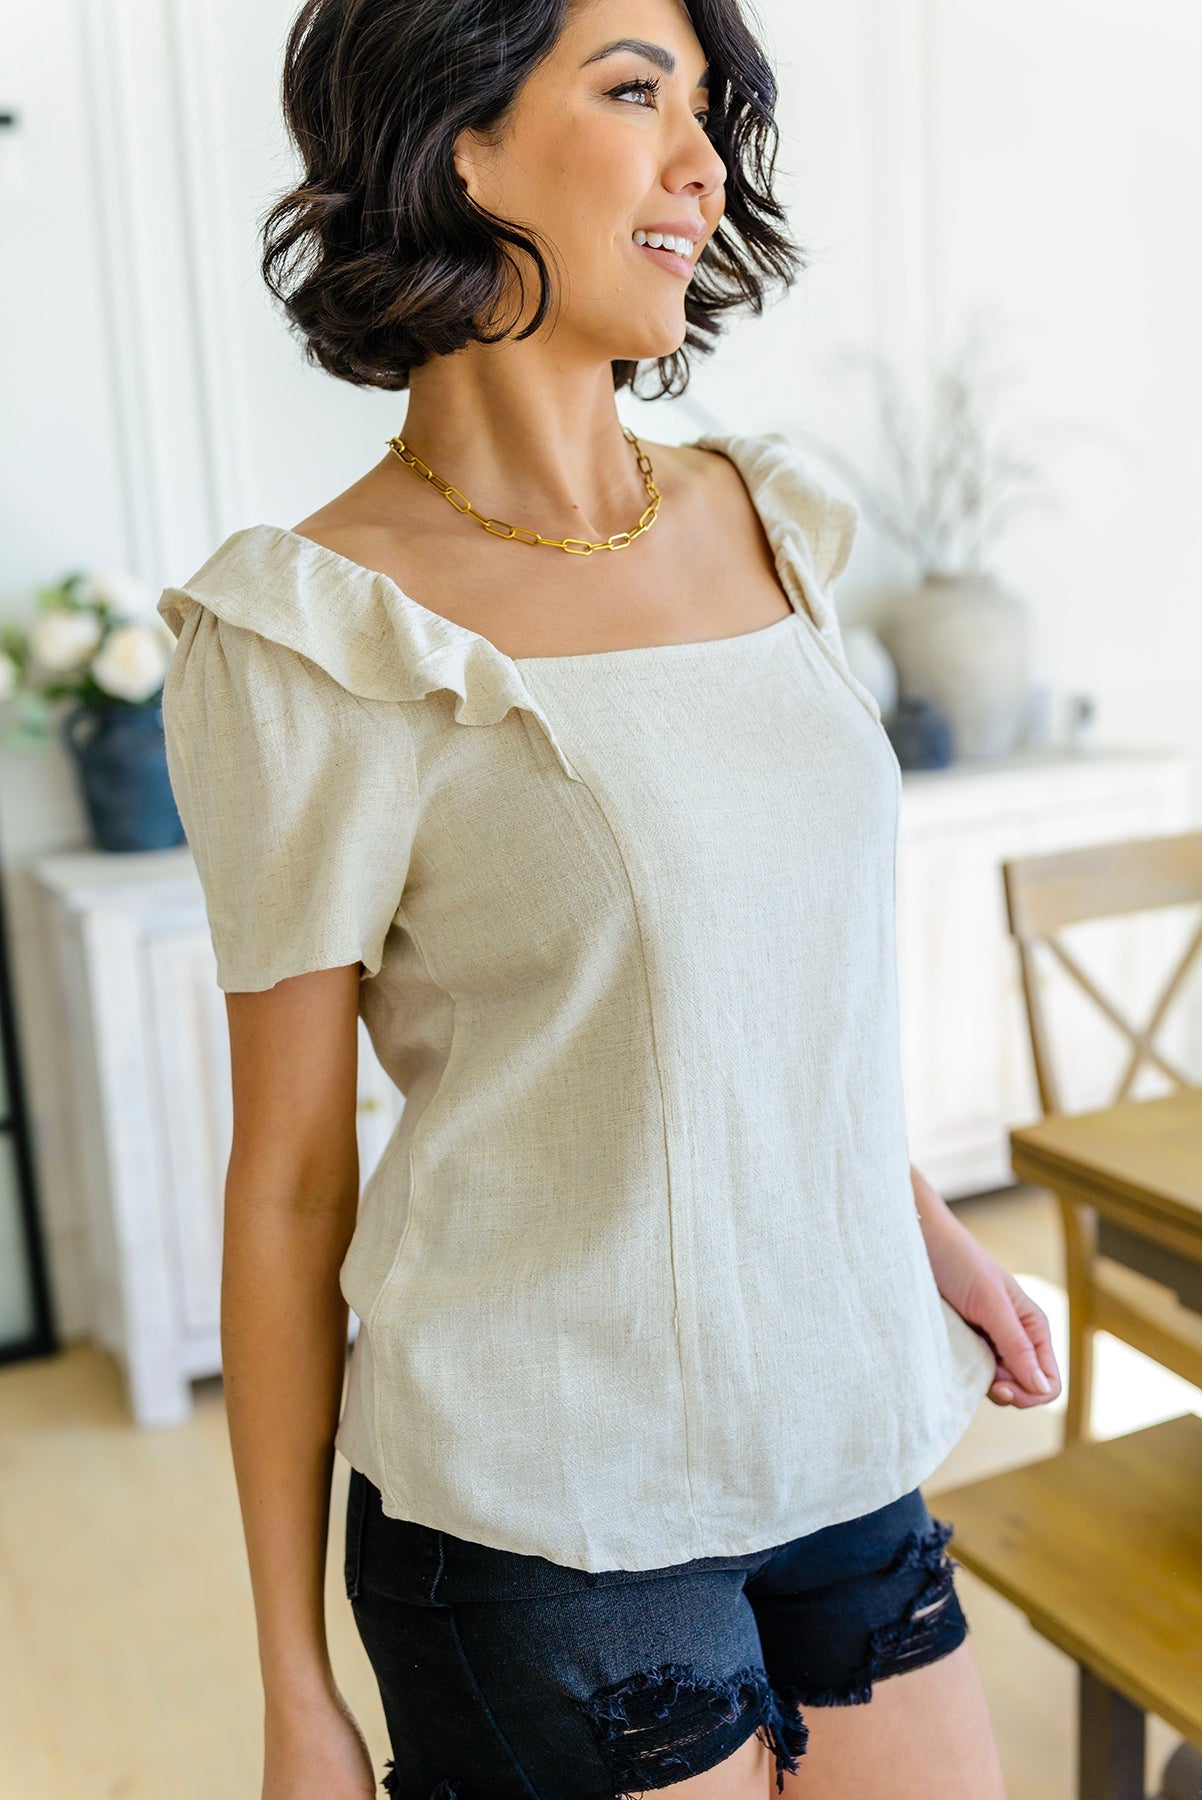 The Old Town Moments Top is so simple yet cute and will pair well with any bottoms! The square neckline and ruffle detail at the shoulders gives this top a feminine yet classy element. We promise you're going to love it! S -3X